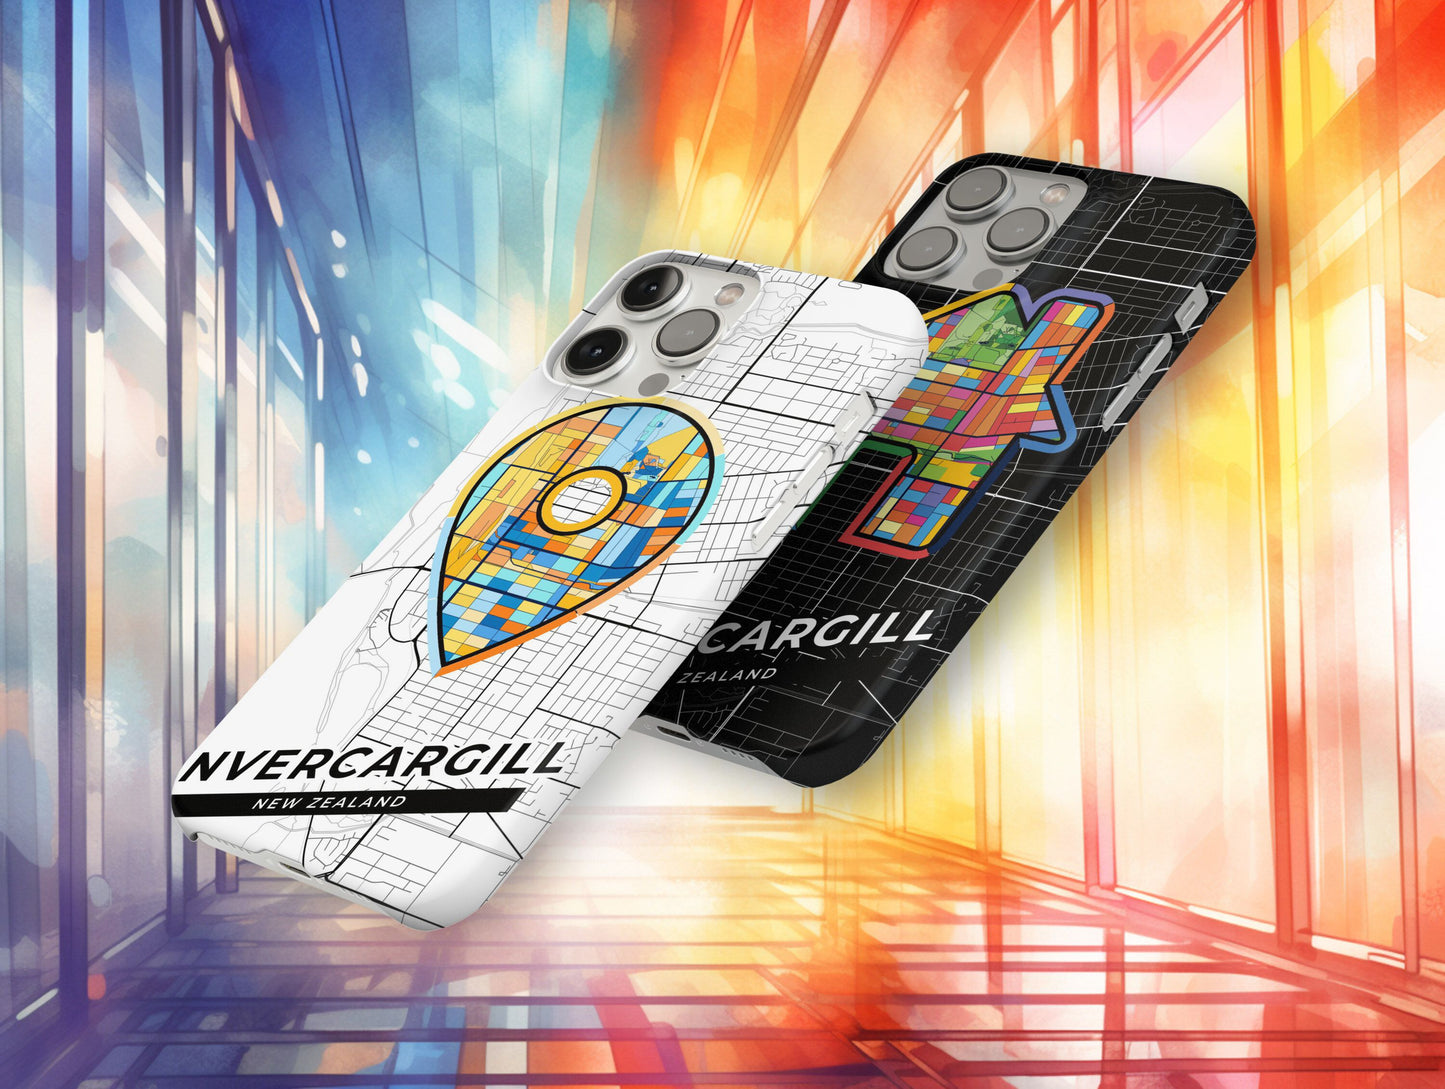 Invercargill New Zealand slim phone case with colorful icon. Birthday, wedding or housewarming gift. Couple match cases.